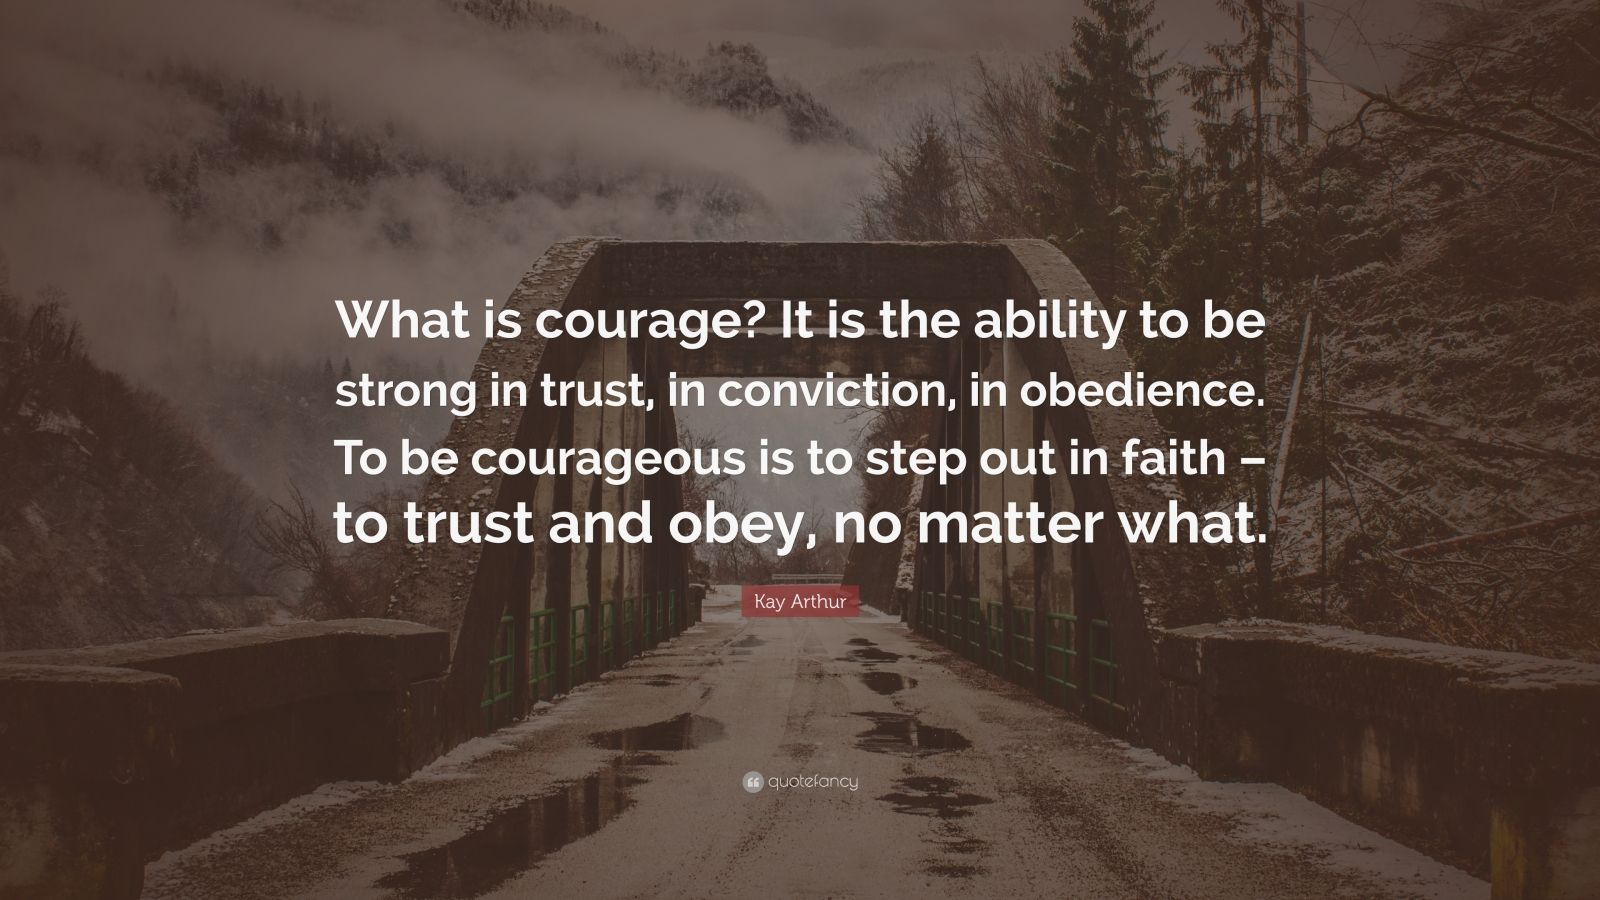 Kay Arthur Quote: “What is courage? It is the ability to be strong in ...